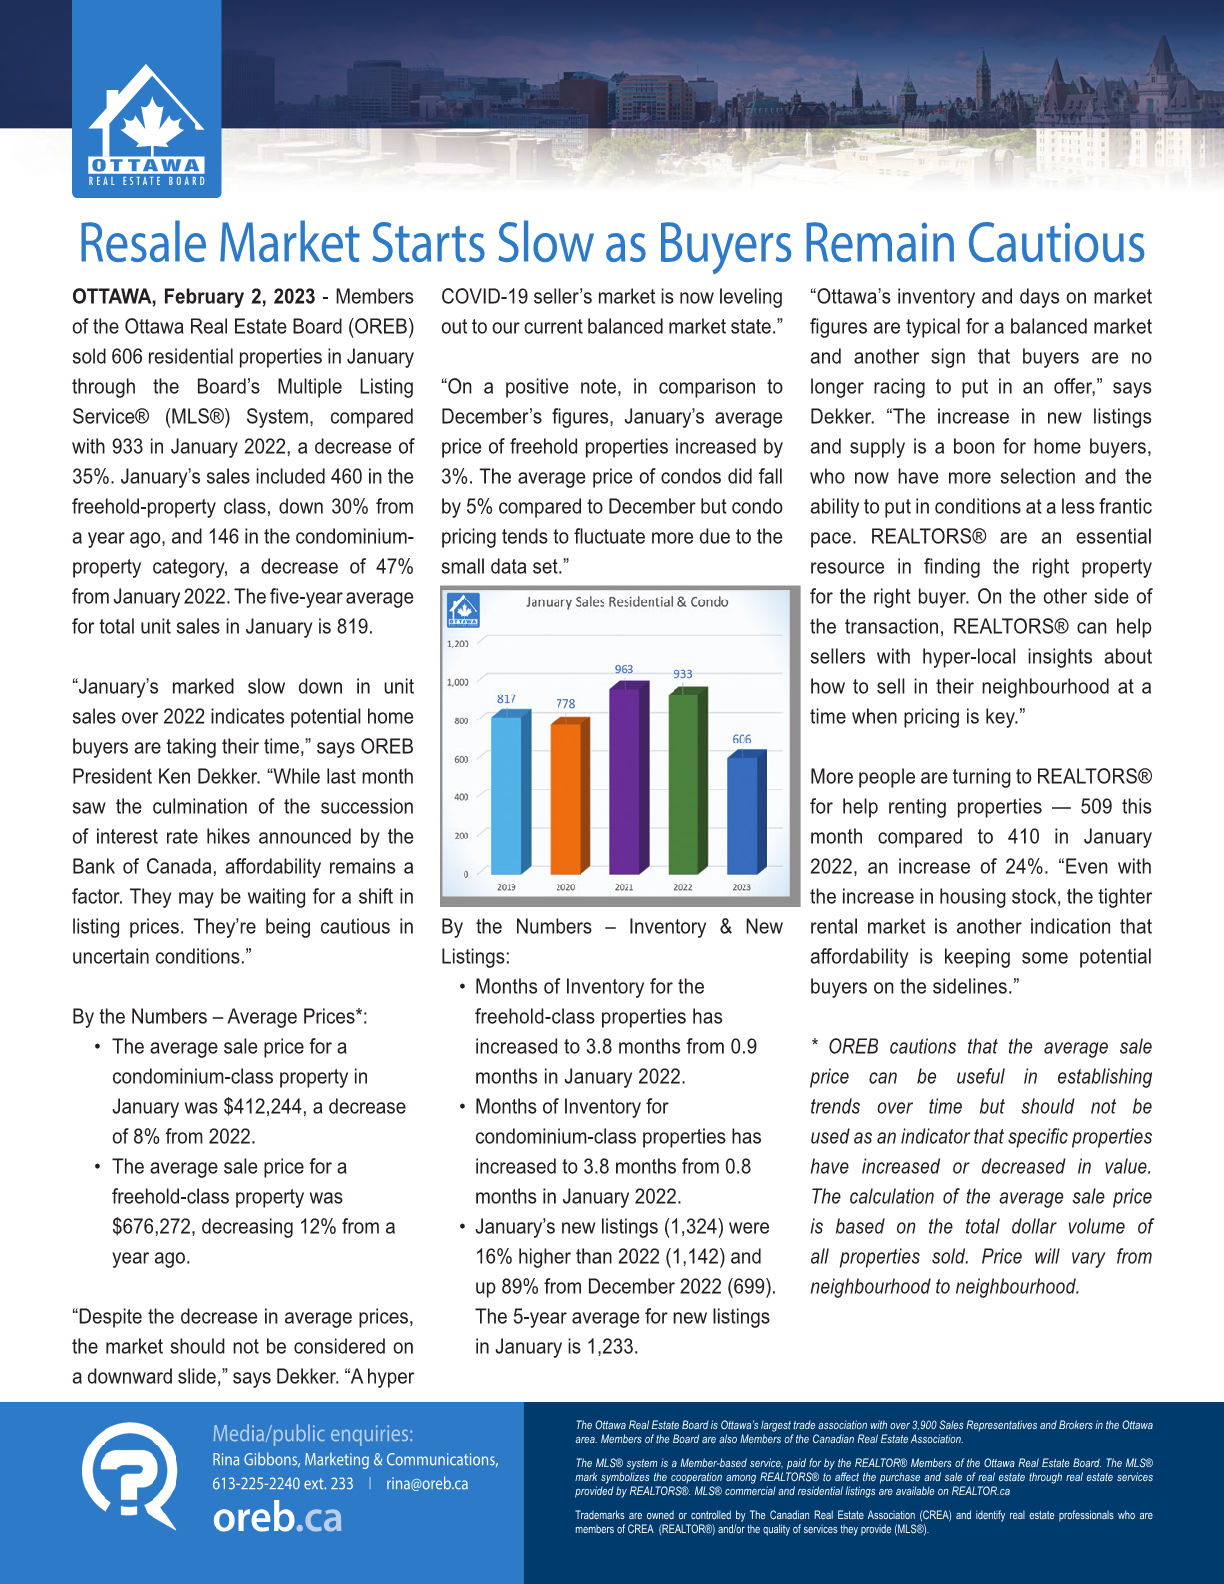 Resale Market Starts Slow as Buyers Remain Cautious | OREB